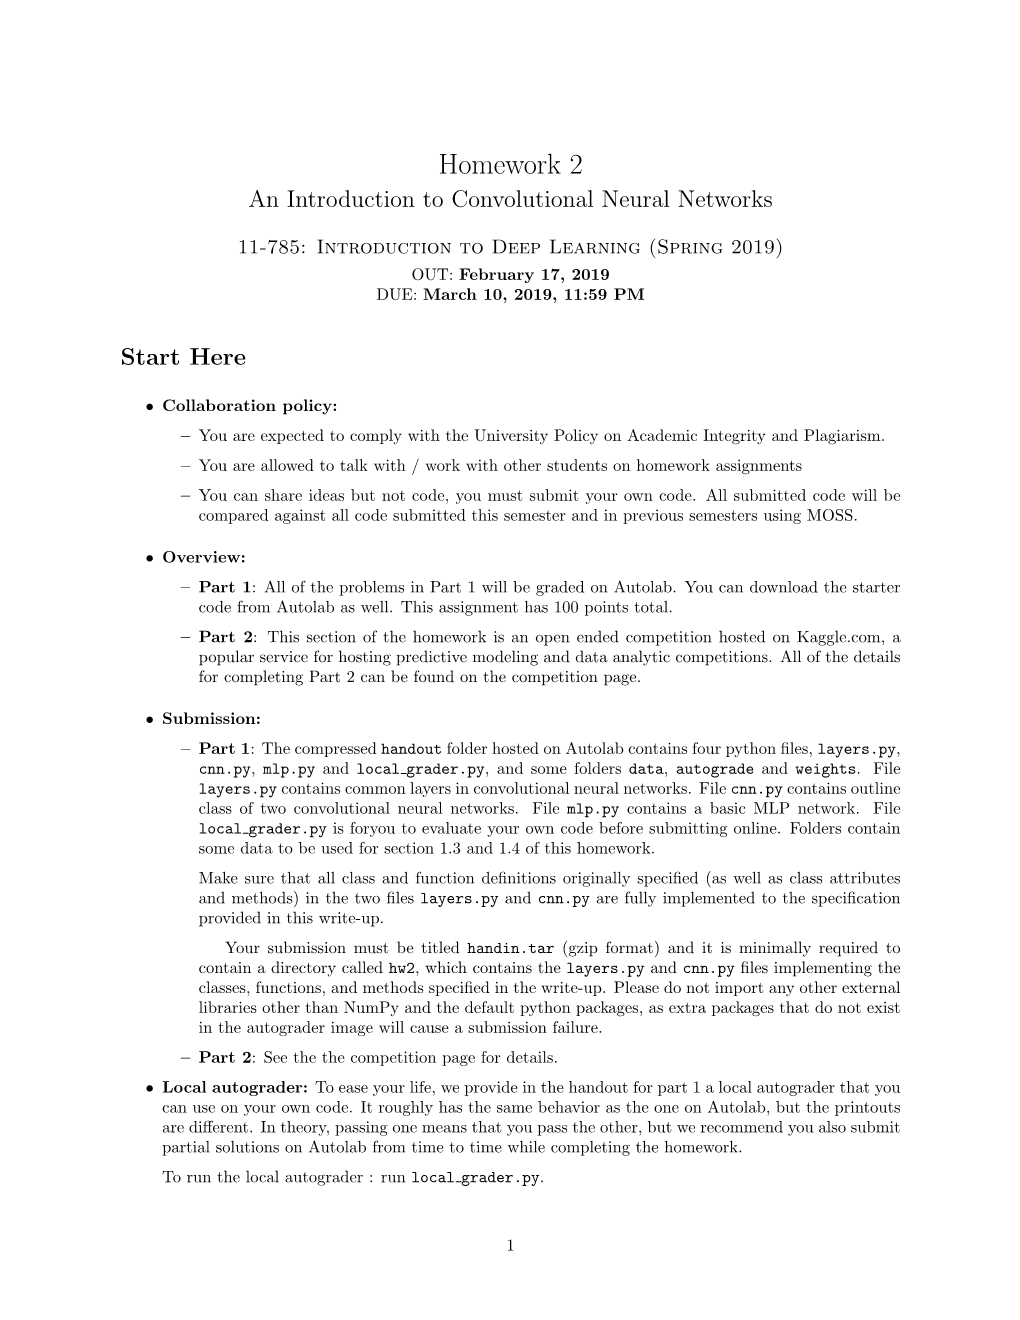 Homework 2 an Introduction to Convolutional Neural Networks